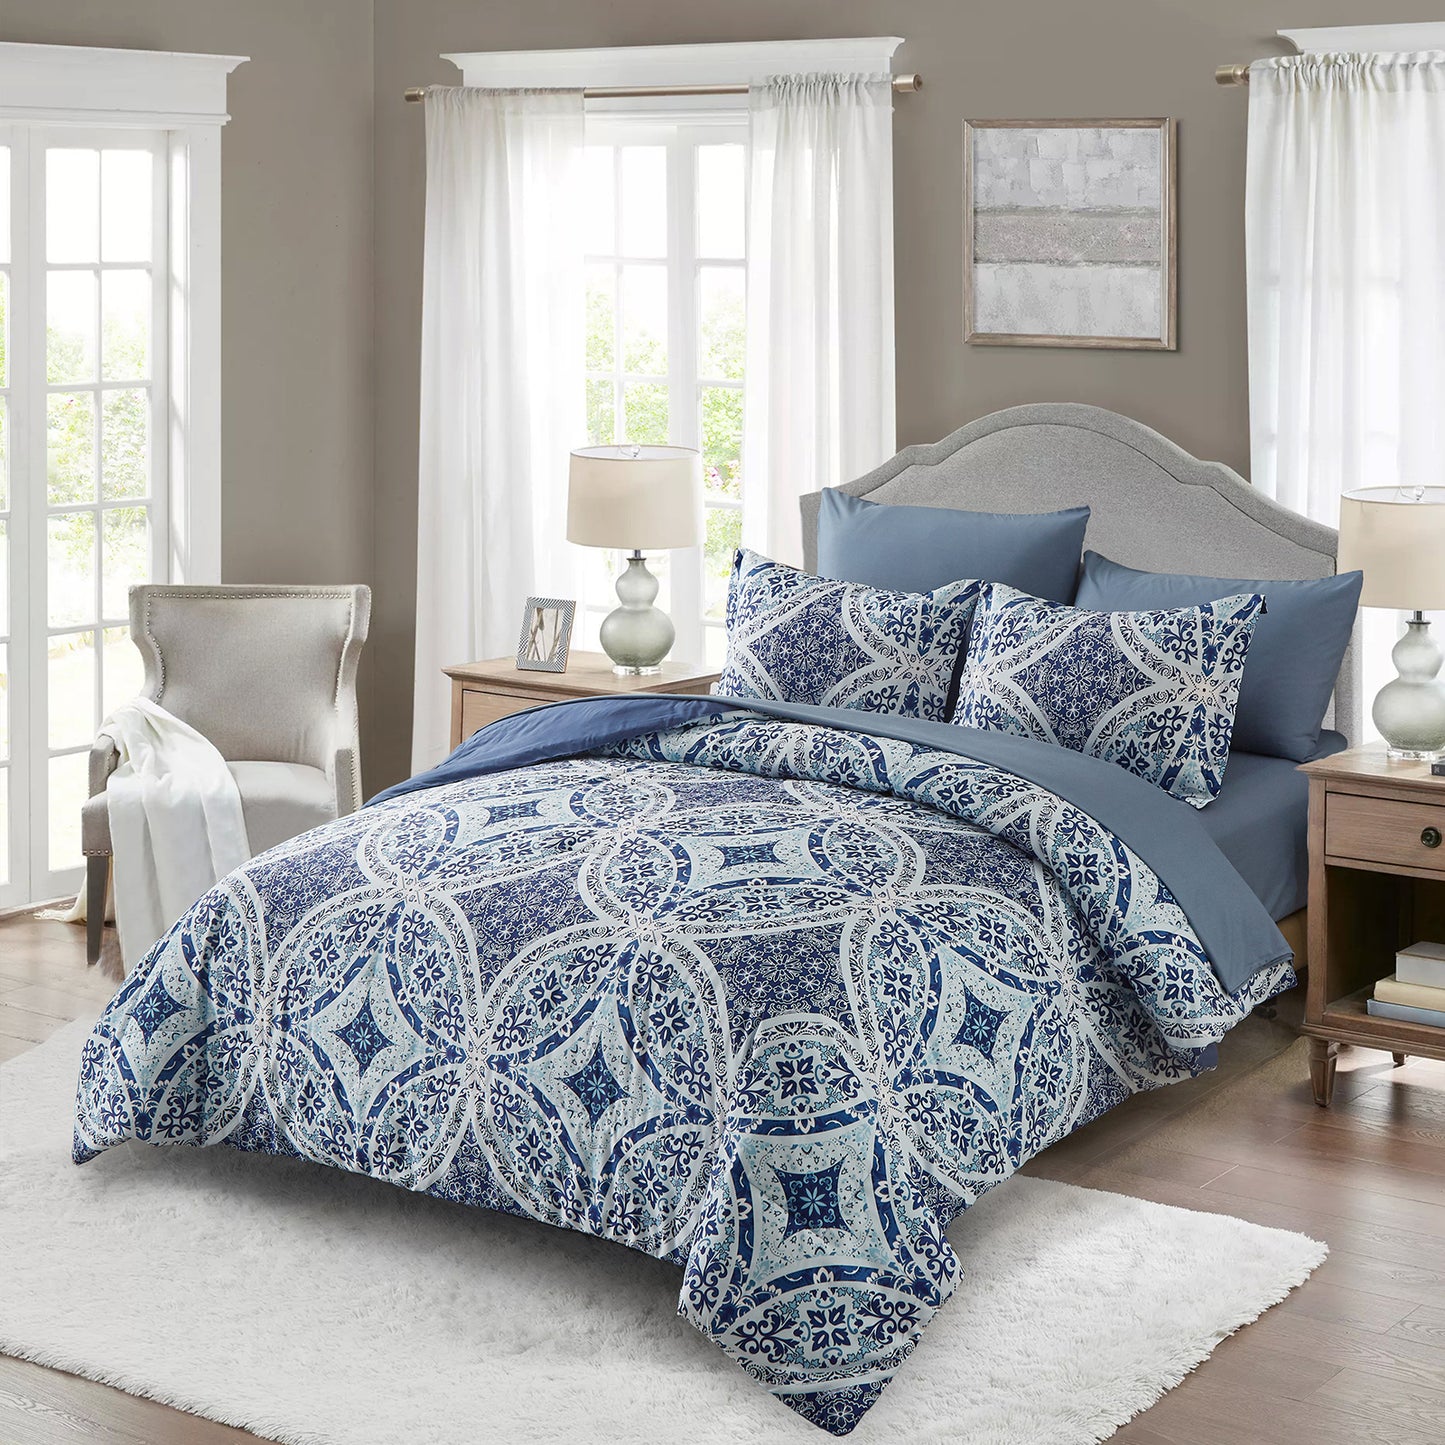 Blue Boho Queen Comforter Set 7 Pieces, Bohemian Bed in a Bag Queen Size with Comforter, Flat Sheet, Fitted Sheet, Pillowcases and Shams, All-Season Warm Bedding Set